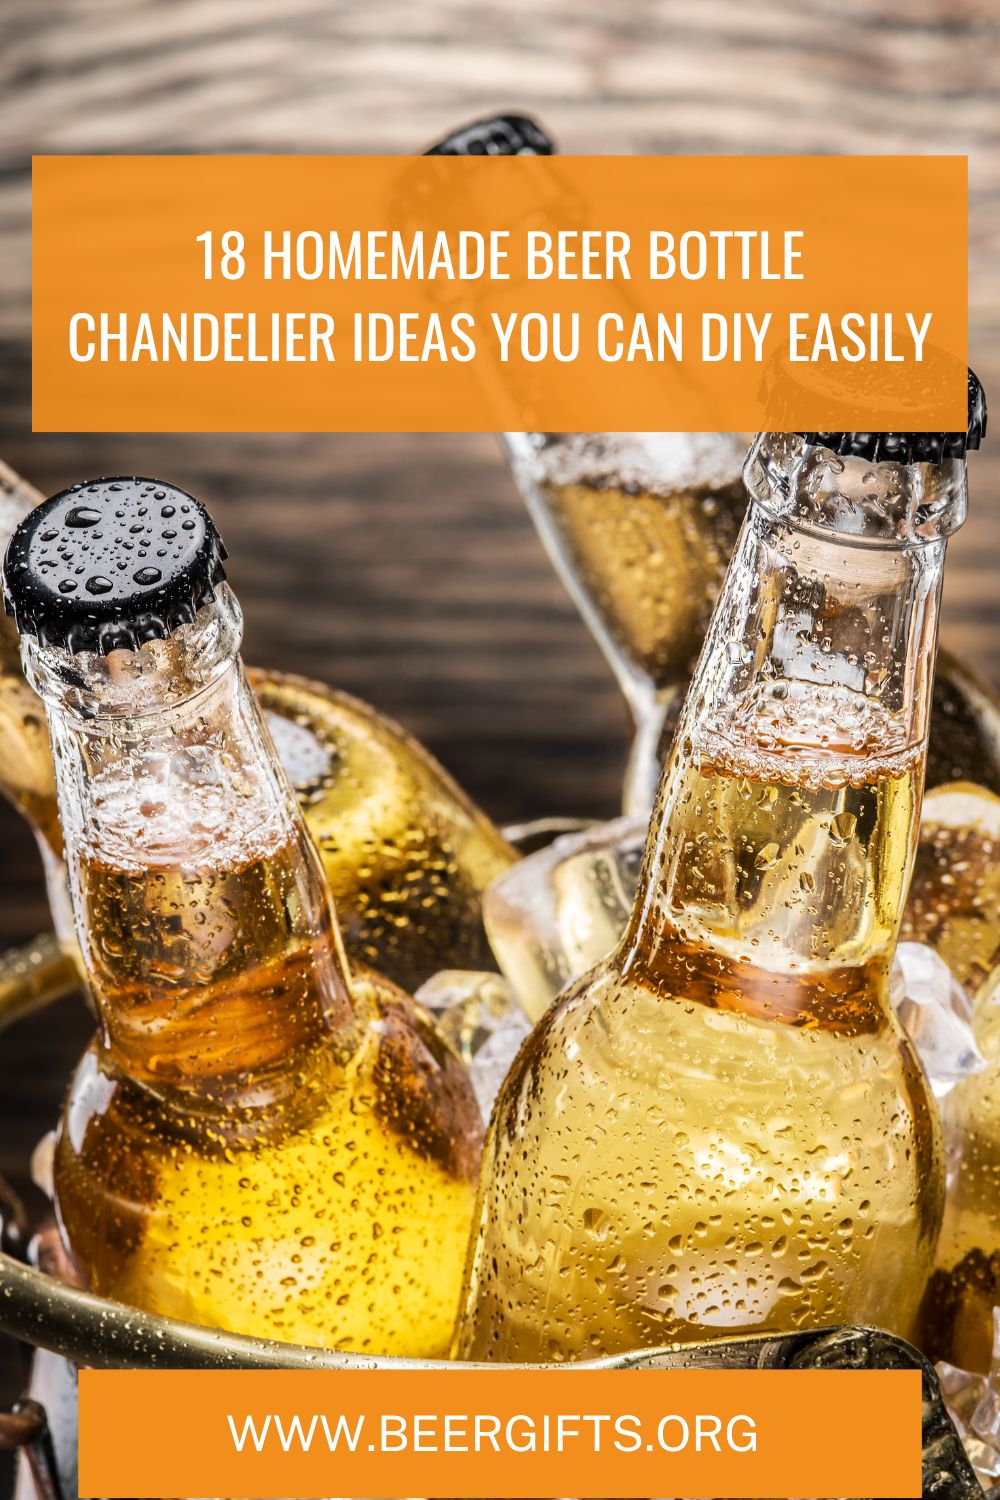 18 Homemade Beer Bottle Chandelier Ideas You Can DIY Easily10